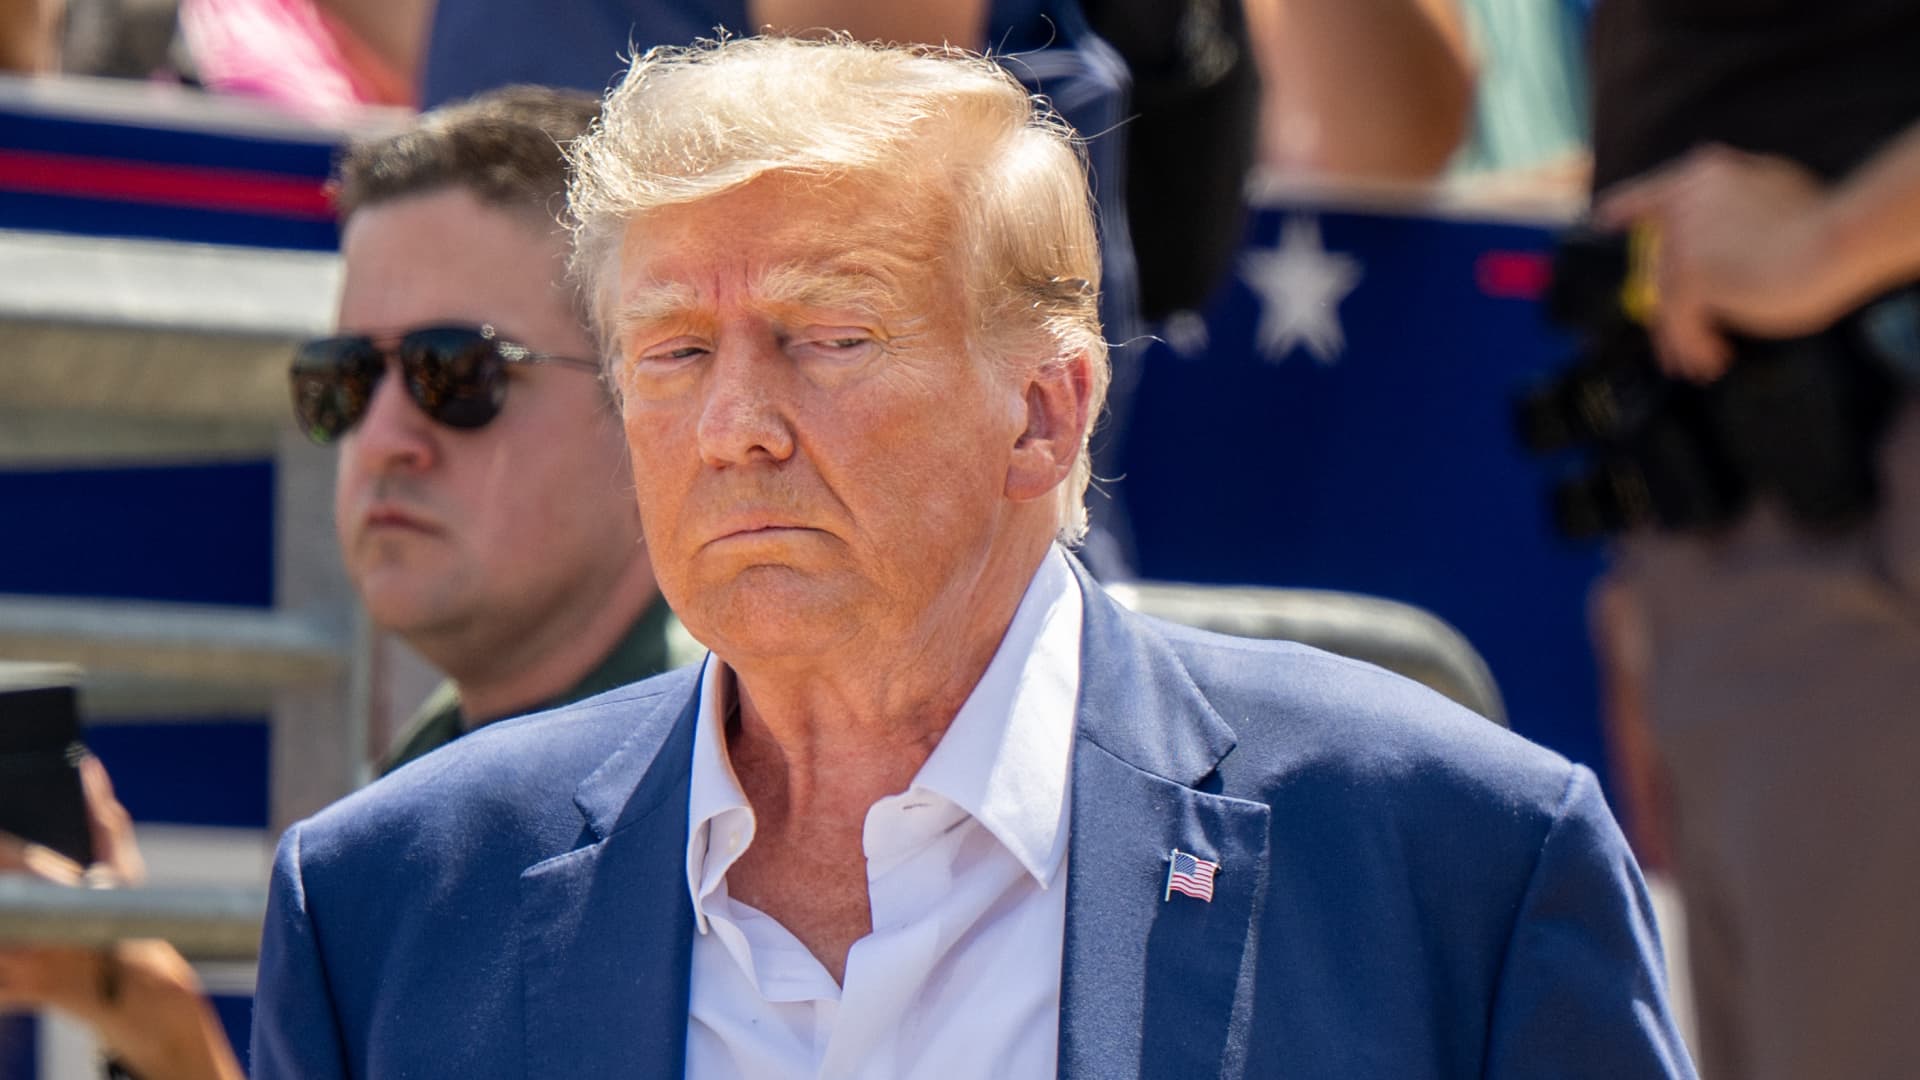 Republican presidential candidate and former U.S. President Donald Trump is directed to his vehicle after speaking at the Steer N' Stein bar at the Iowa State Fair on August 12, 2023 in Des Moines, Iowa.